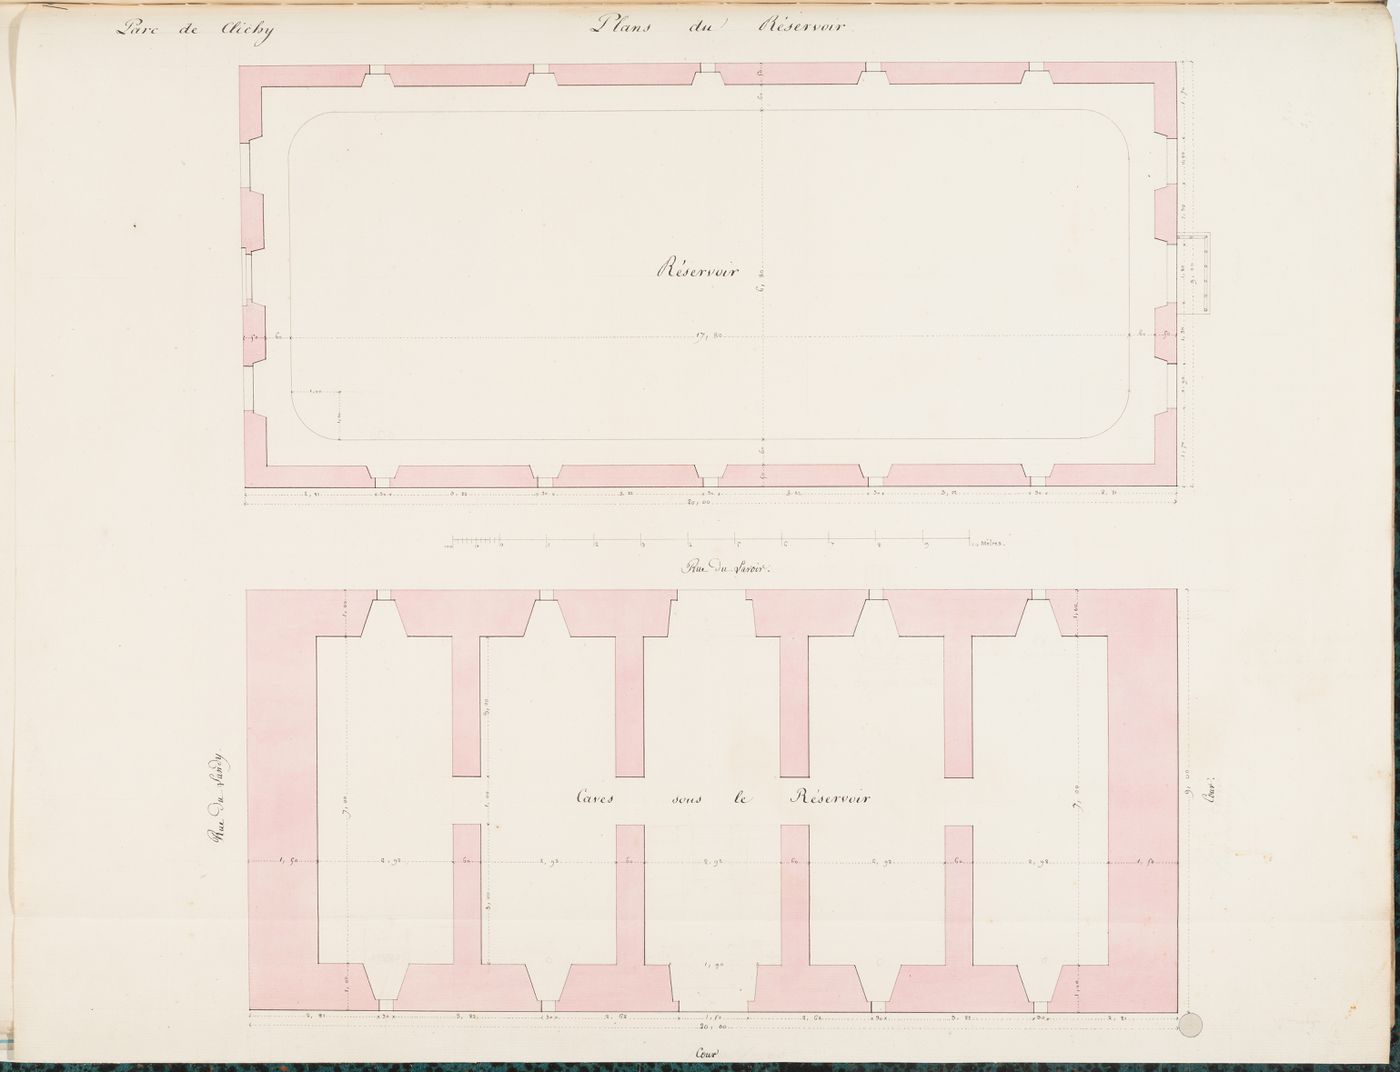 Plans for the "caves" and the basin of a reservoir, Parc de Clichy